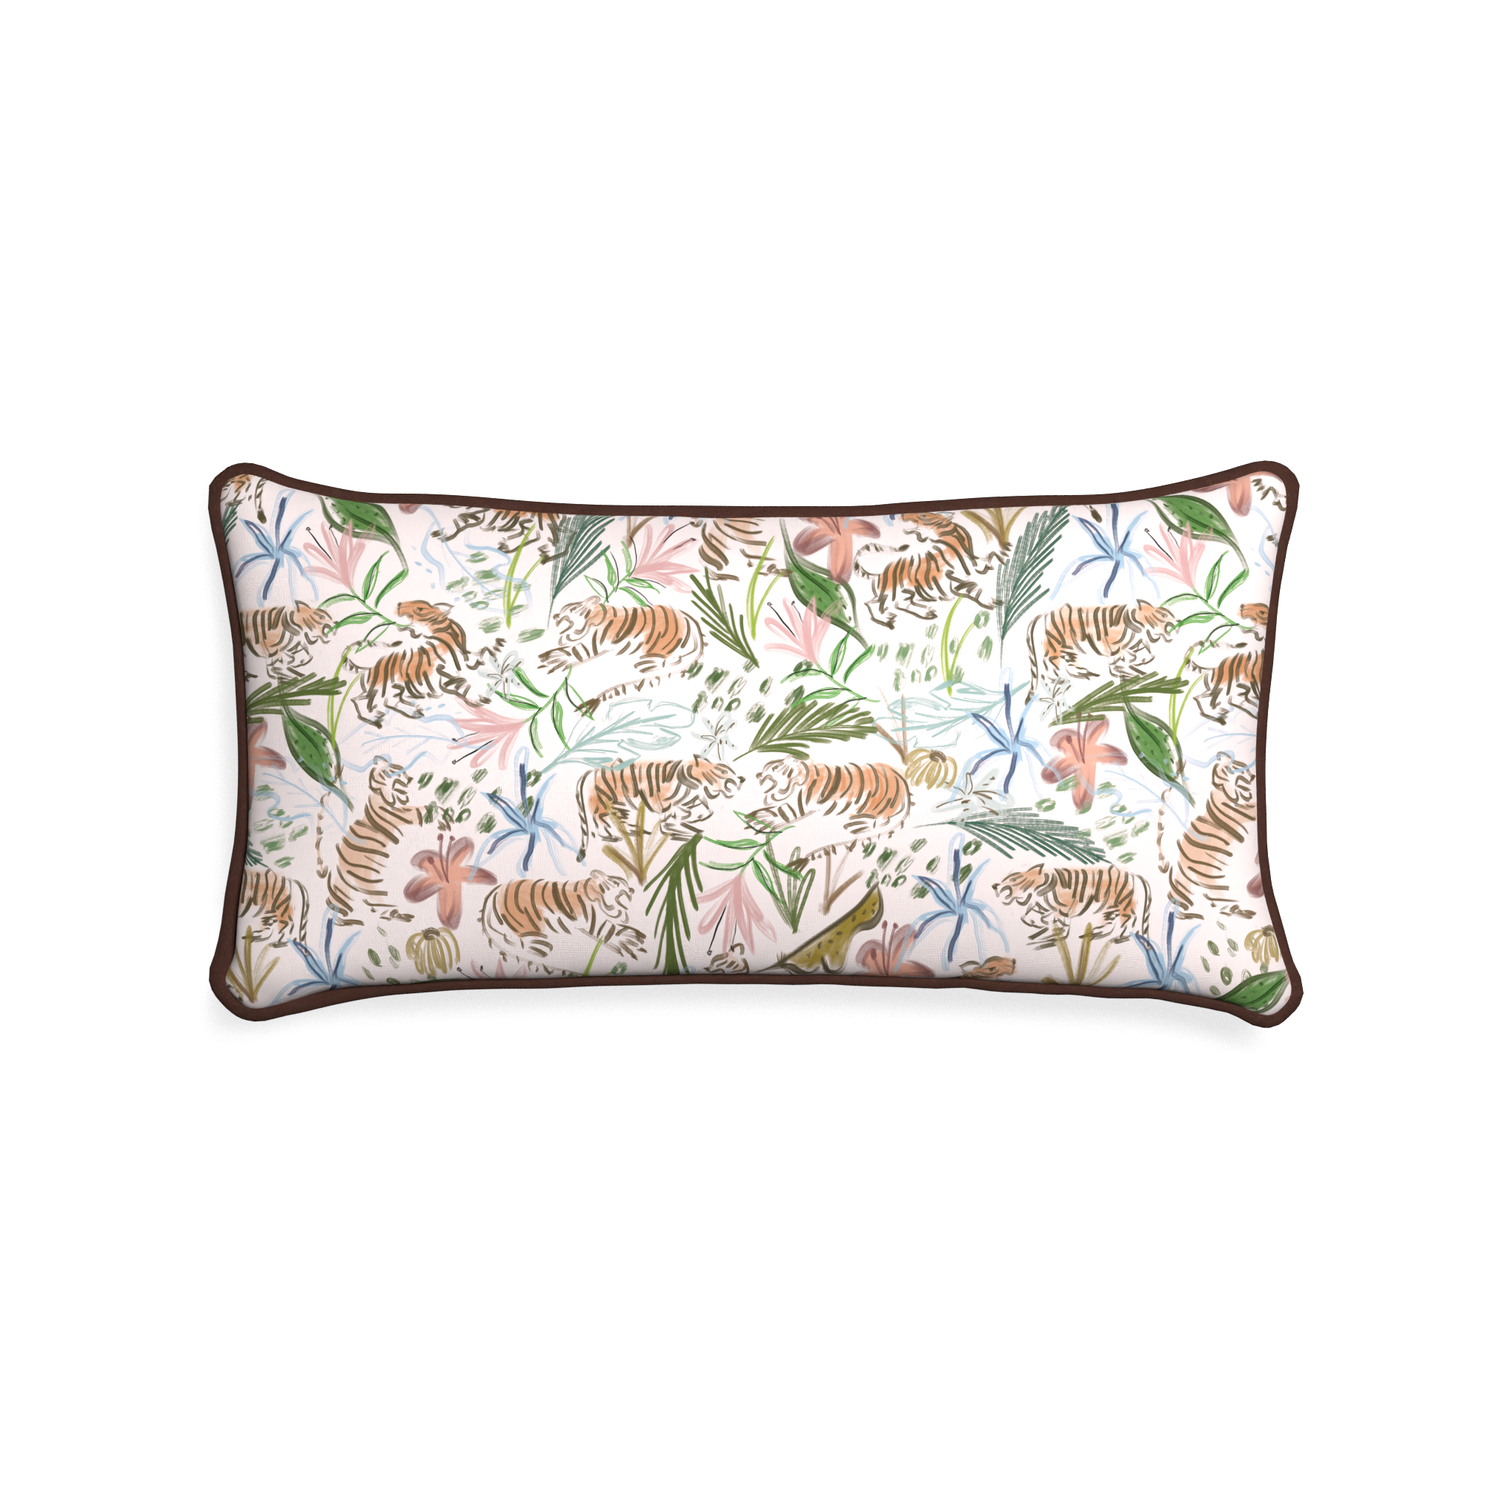 Midi-lumbar frida pink custom pink chinoiserie tigerpillow with w piping on white background